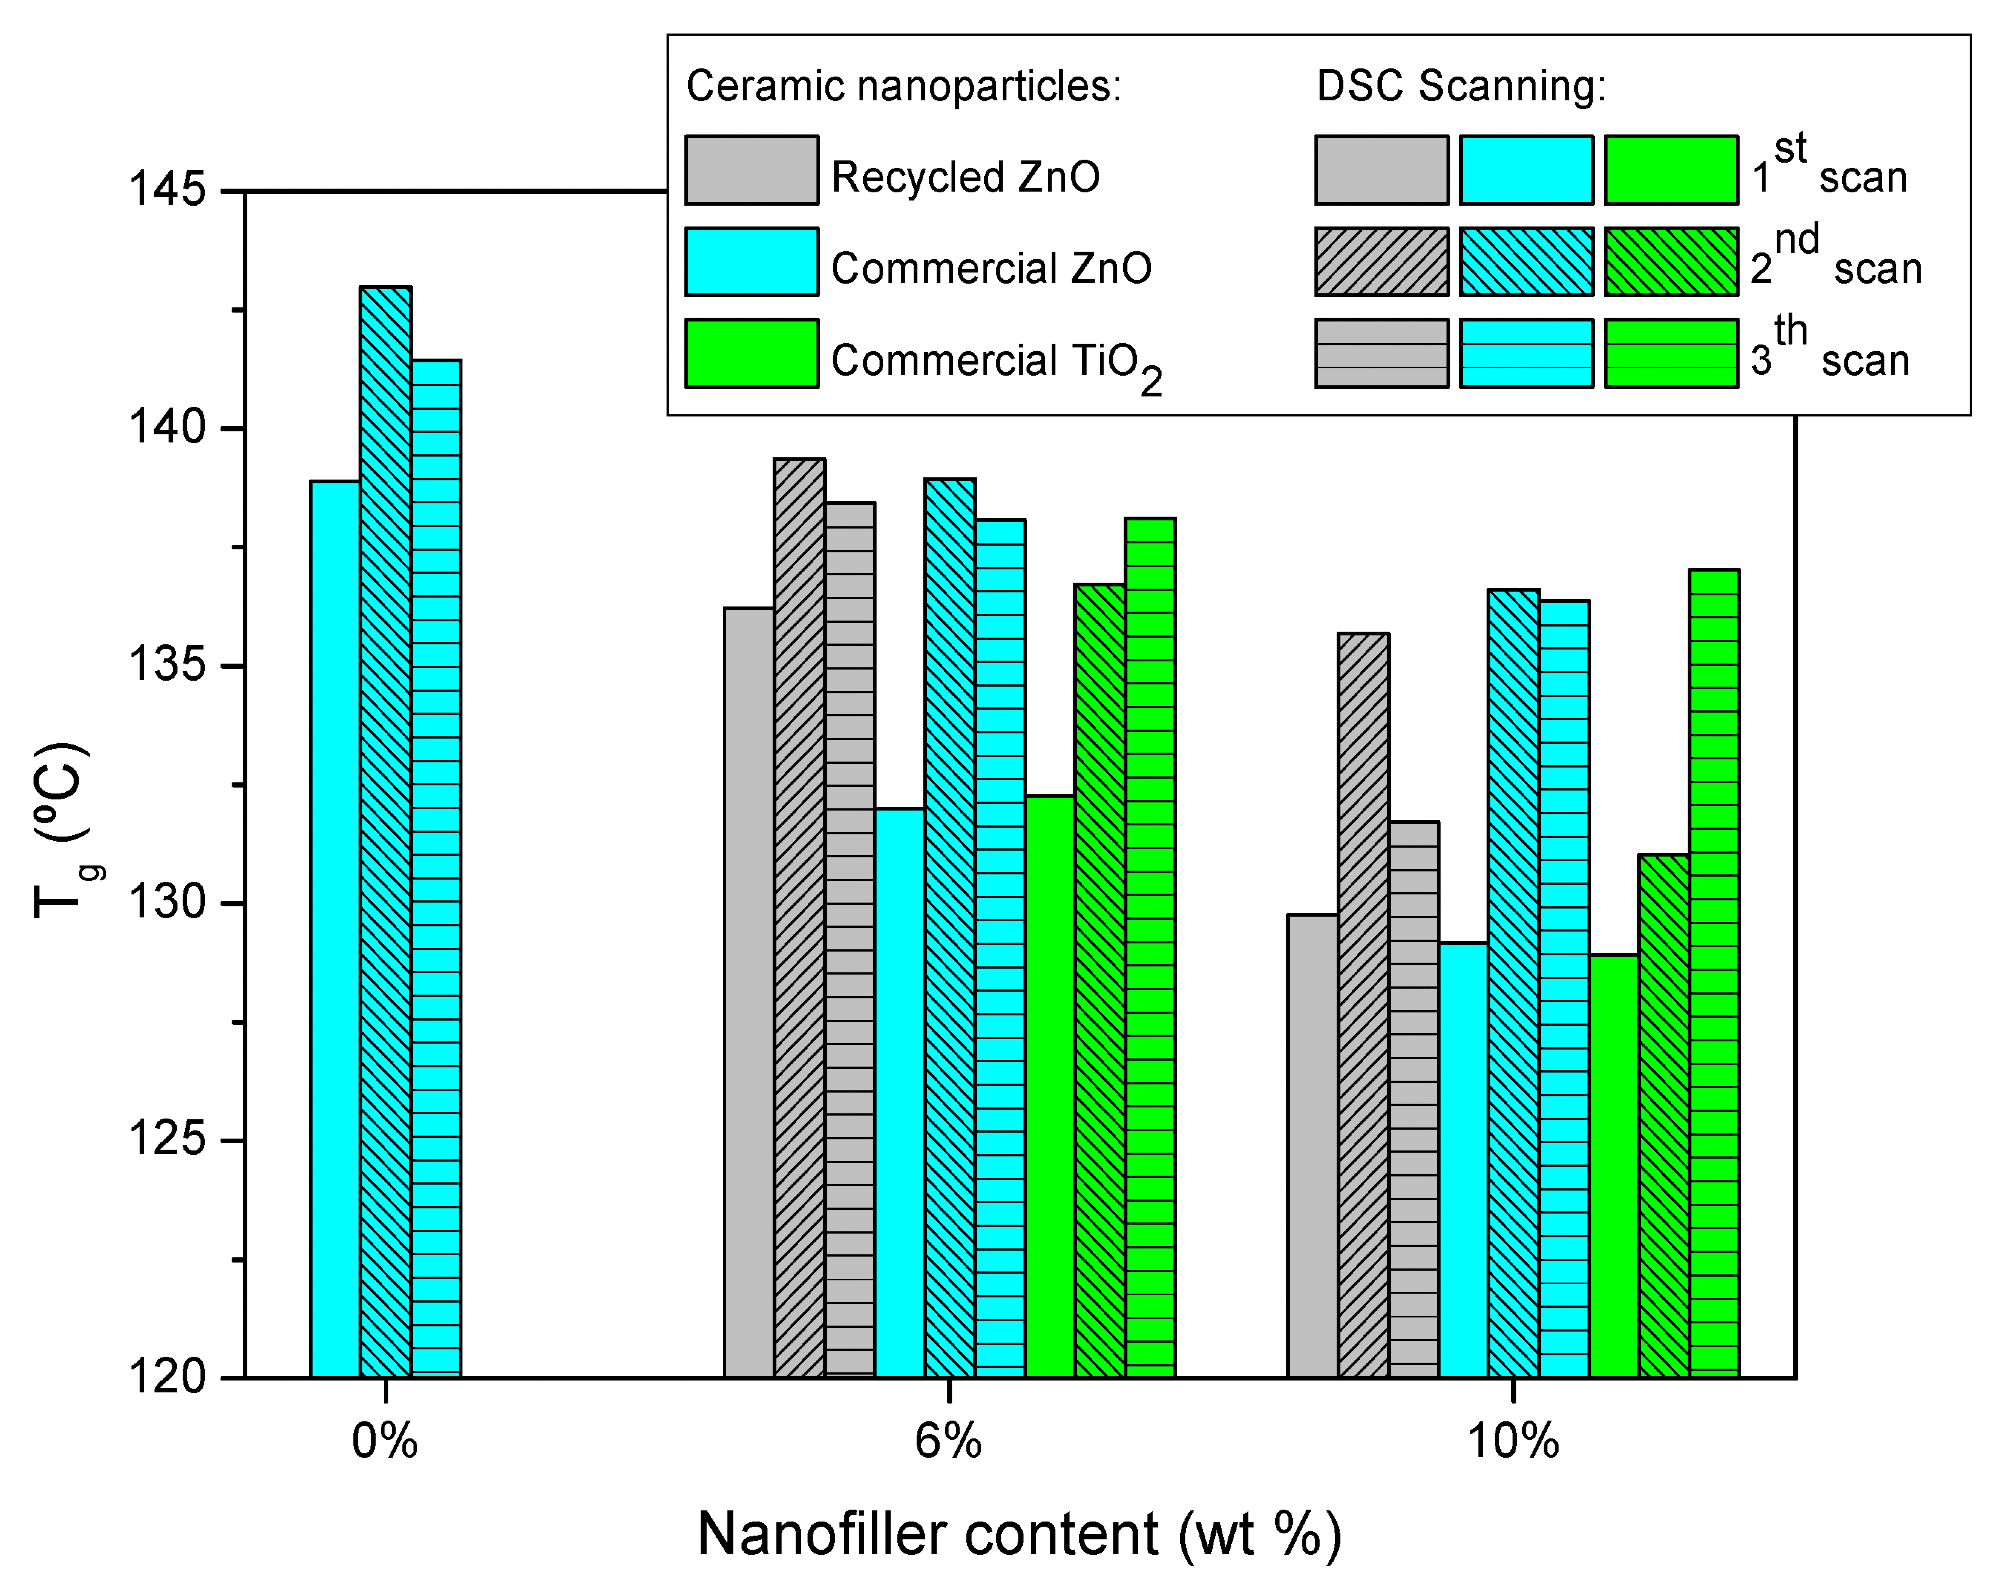 Glass transition temperature, measured by three consecutive DSC scans, for the studied epoxy composites reinforced with ceramic nanoparticles.